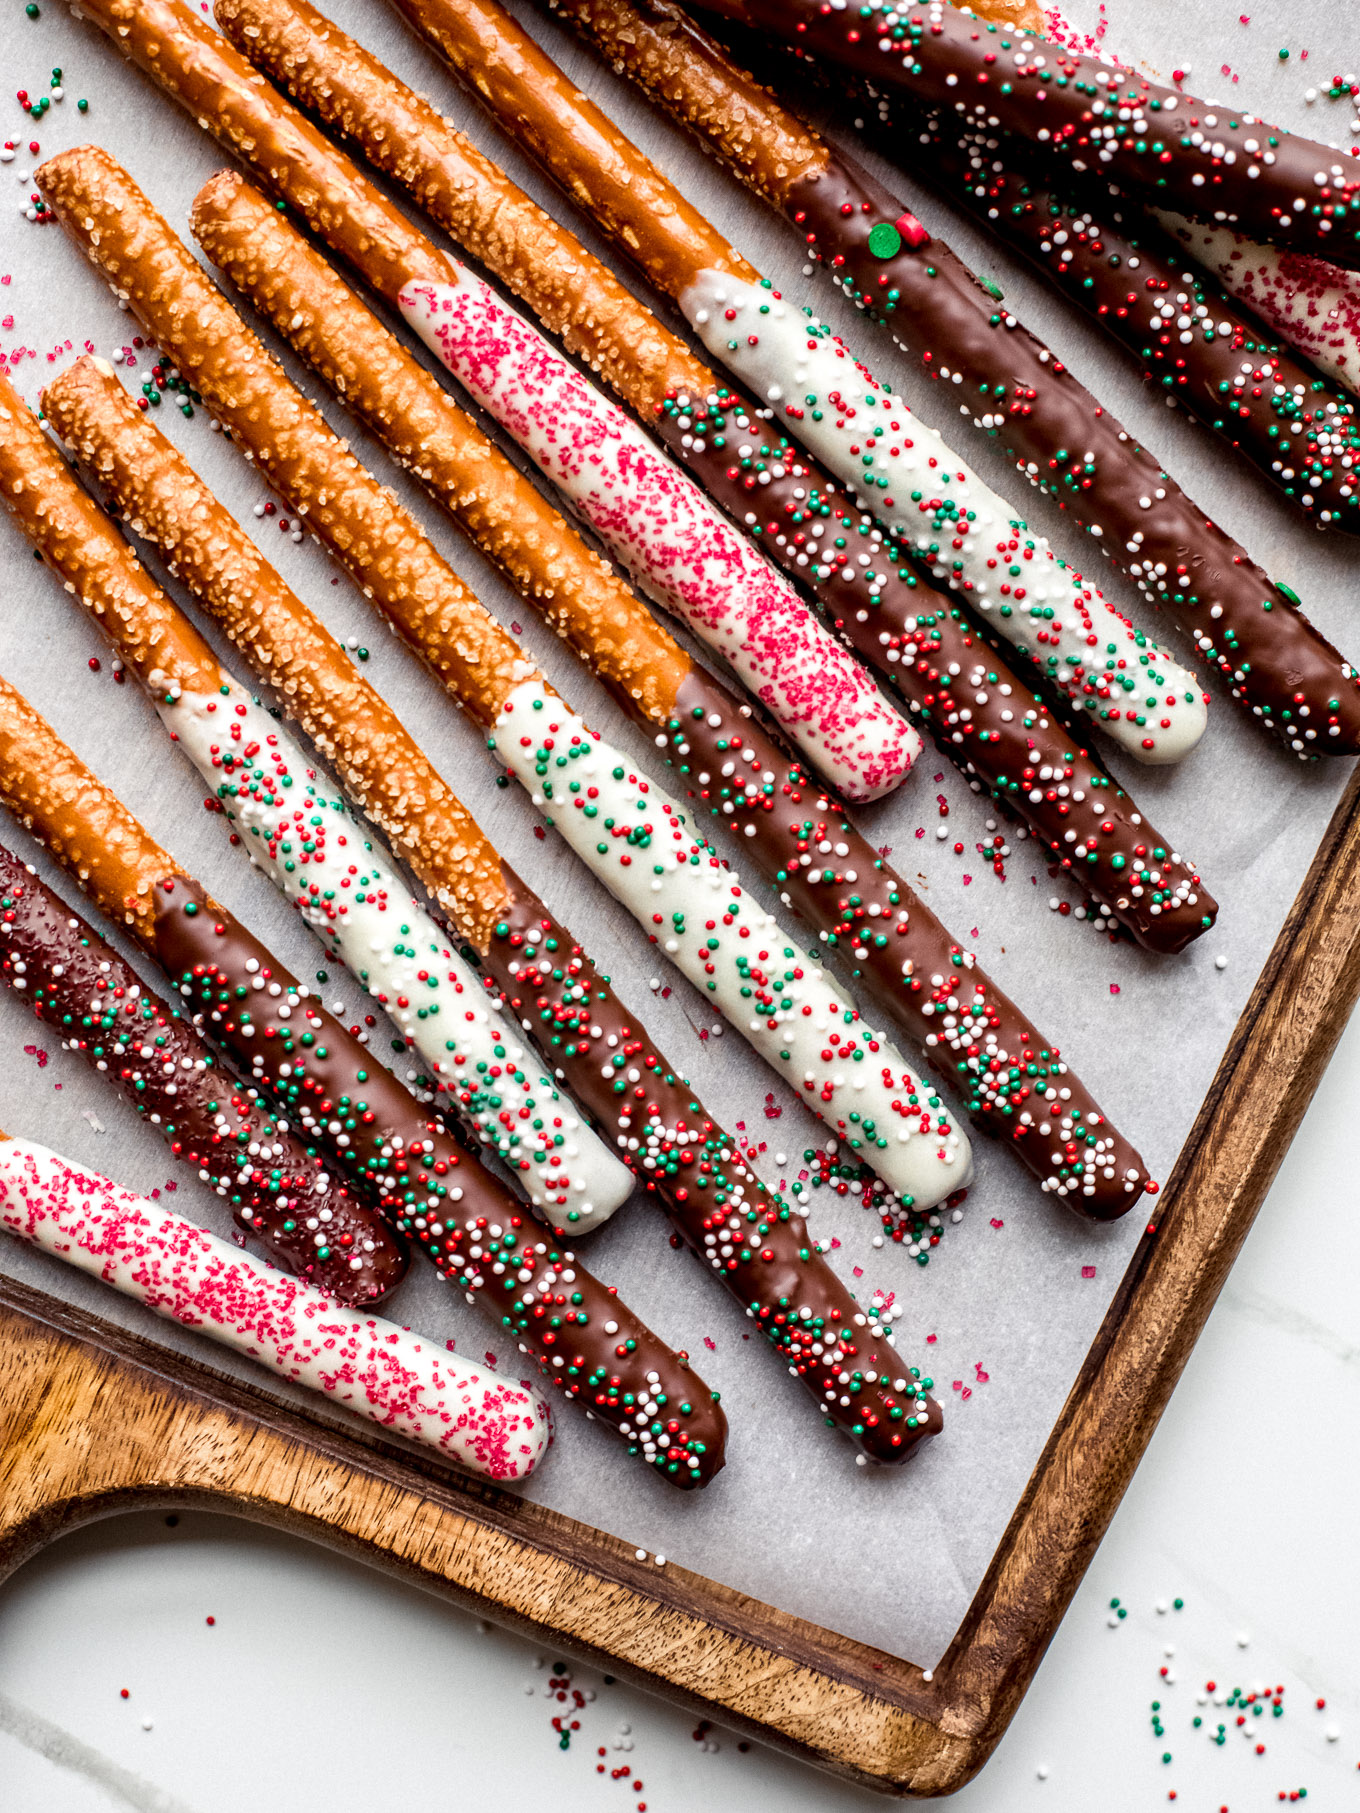 Chocolate Pretzels With Toppings